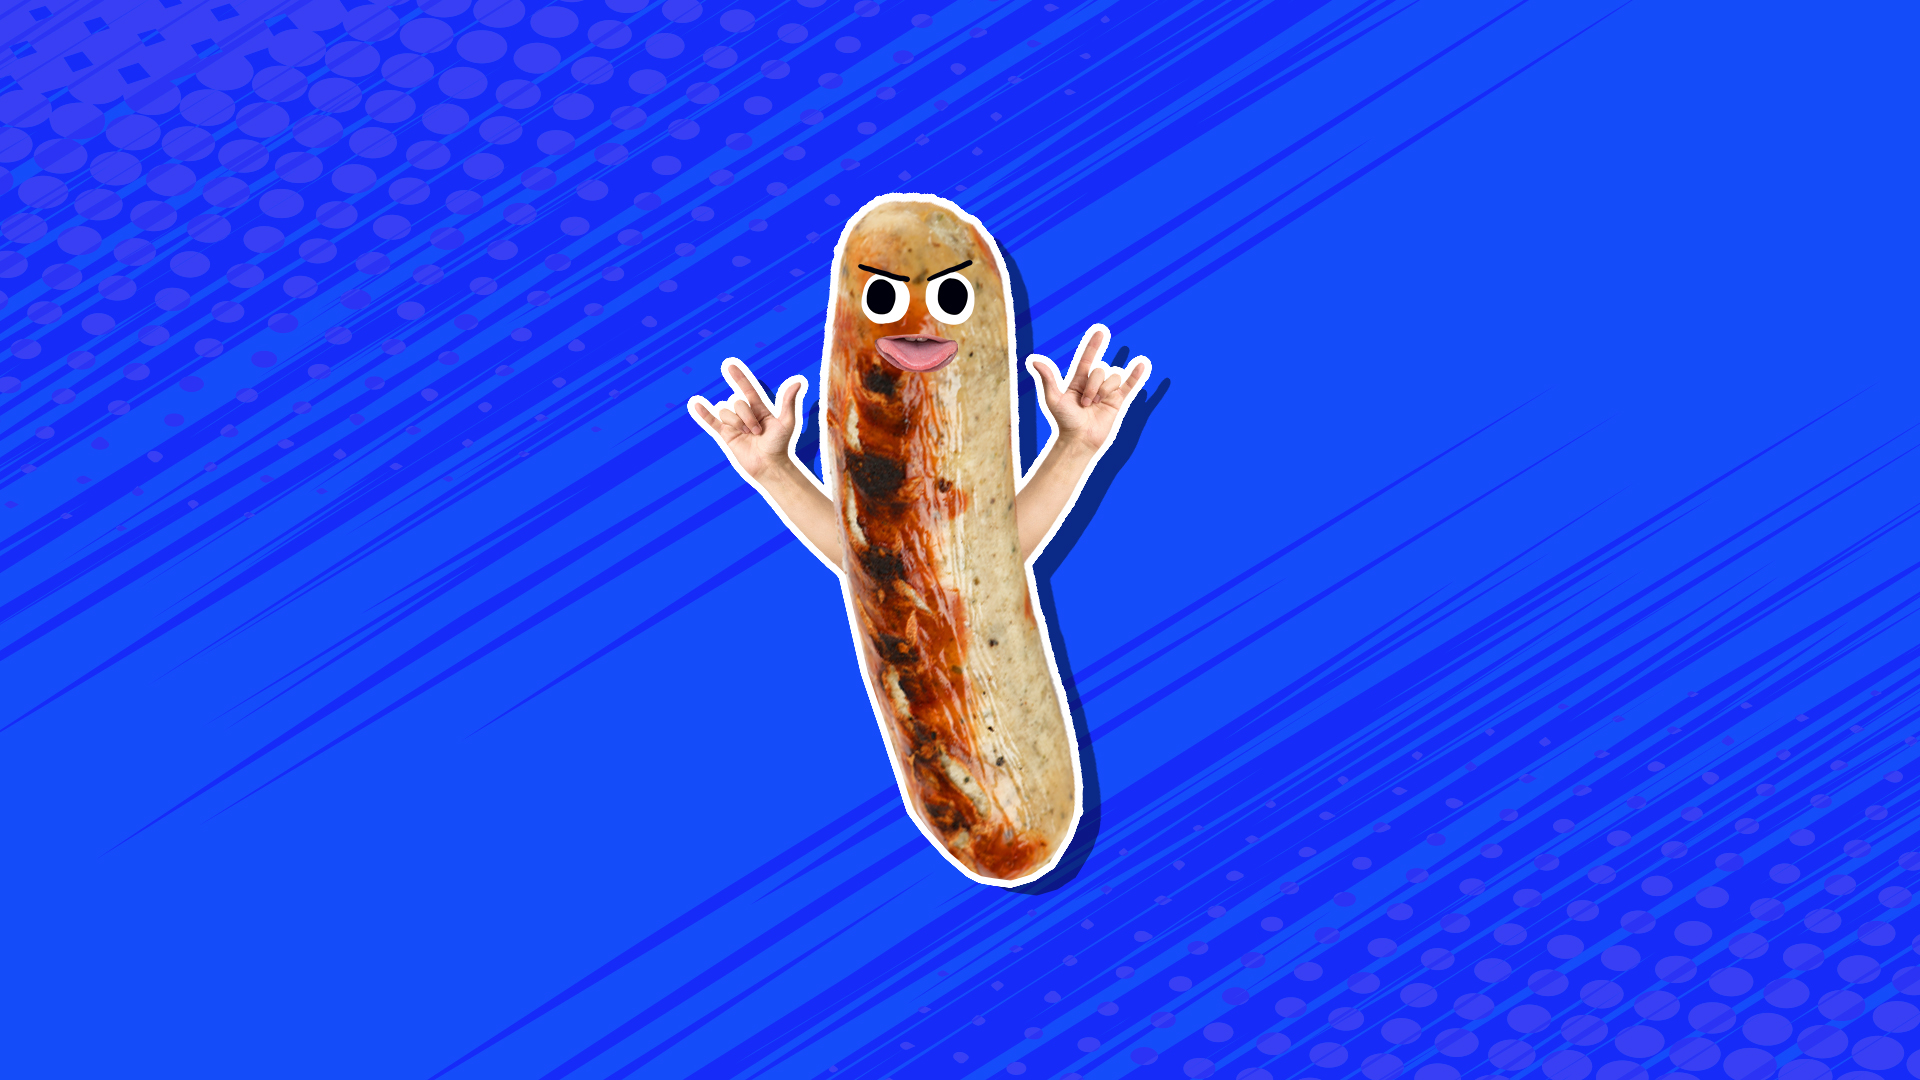 A sausage excited about rock music 